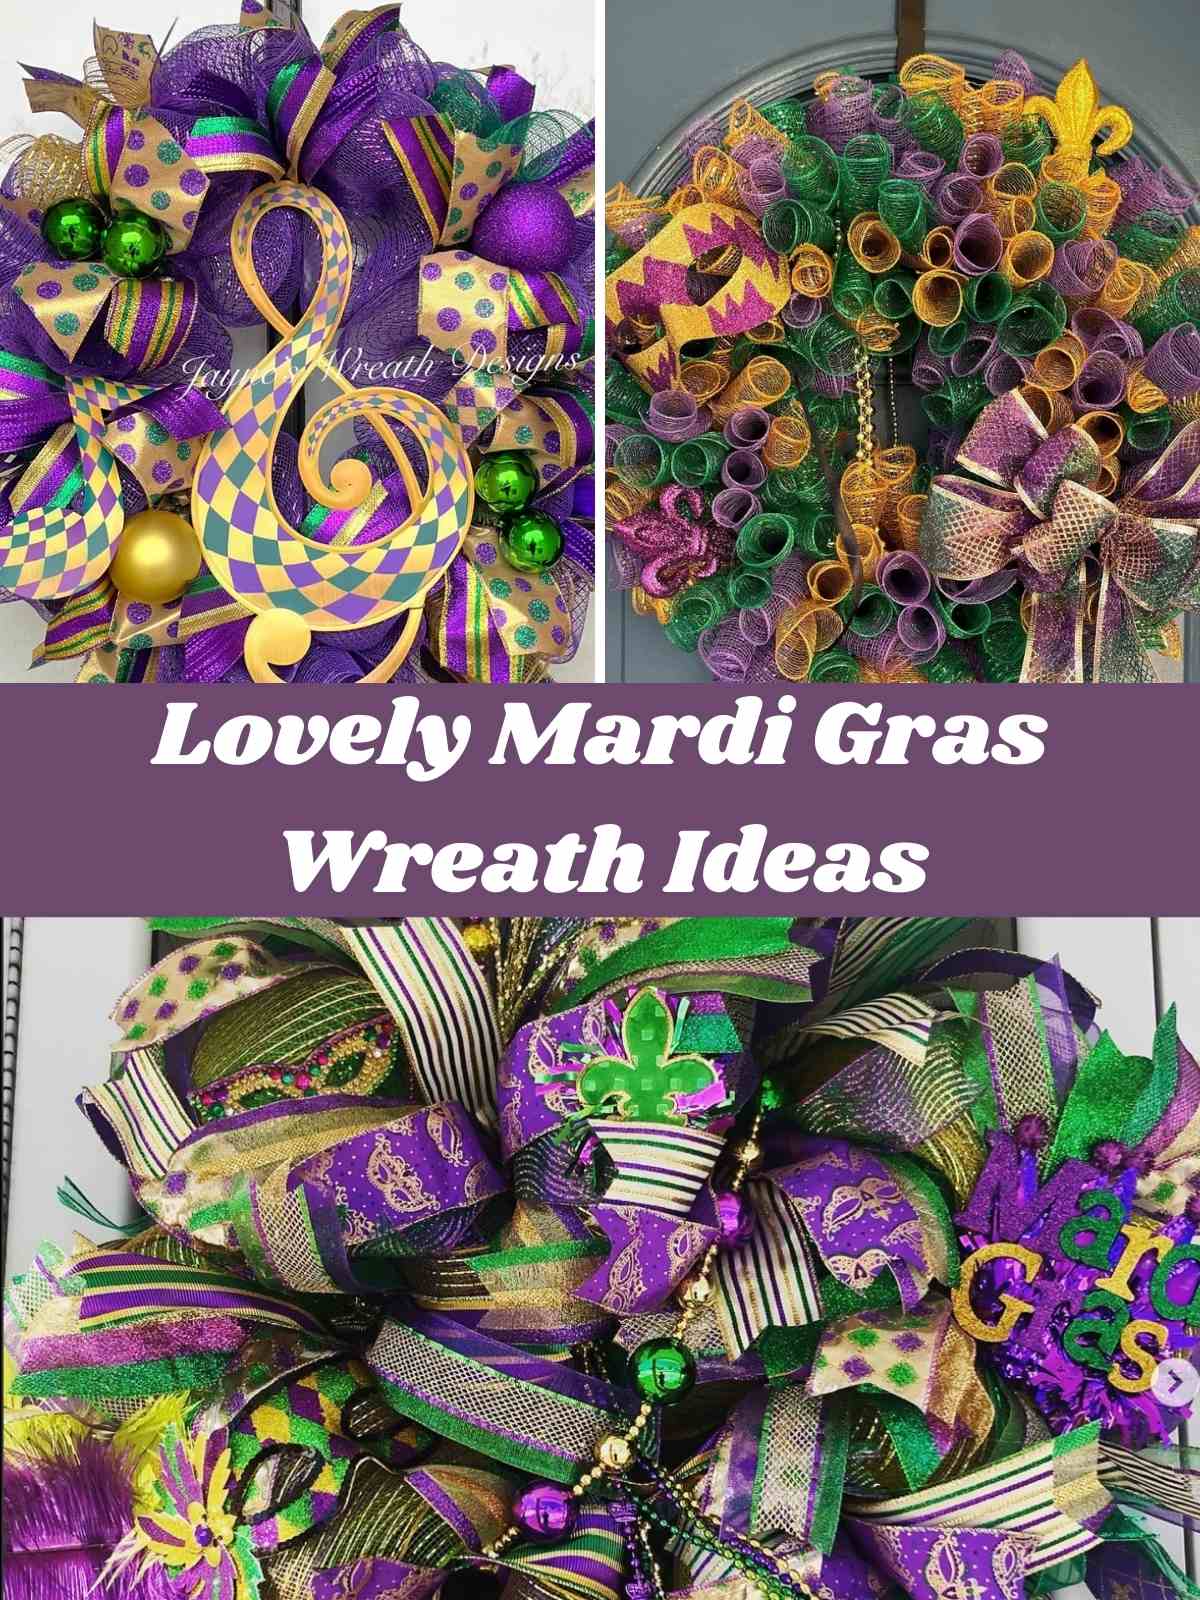 3 wreaths made with purple ribbon and gold mesh.